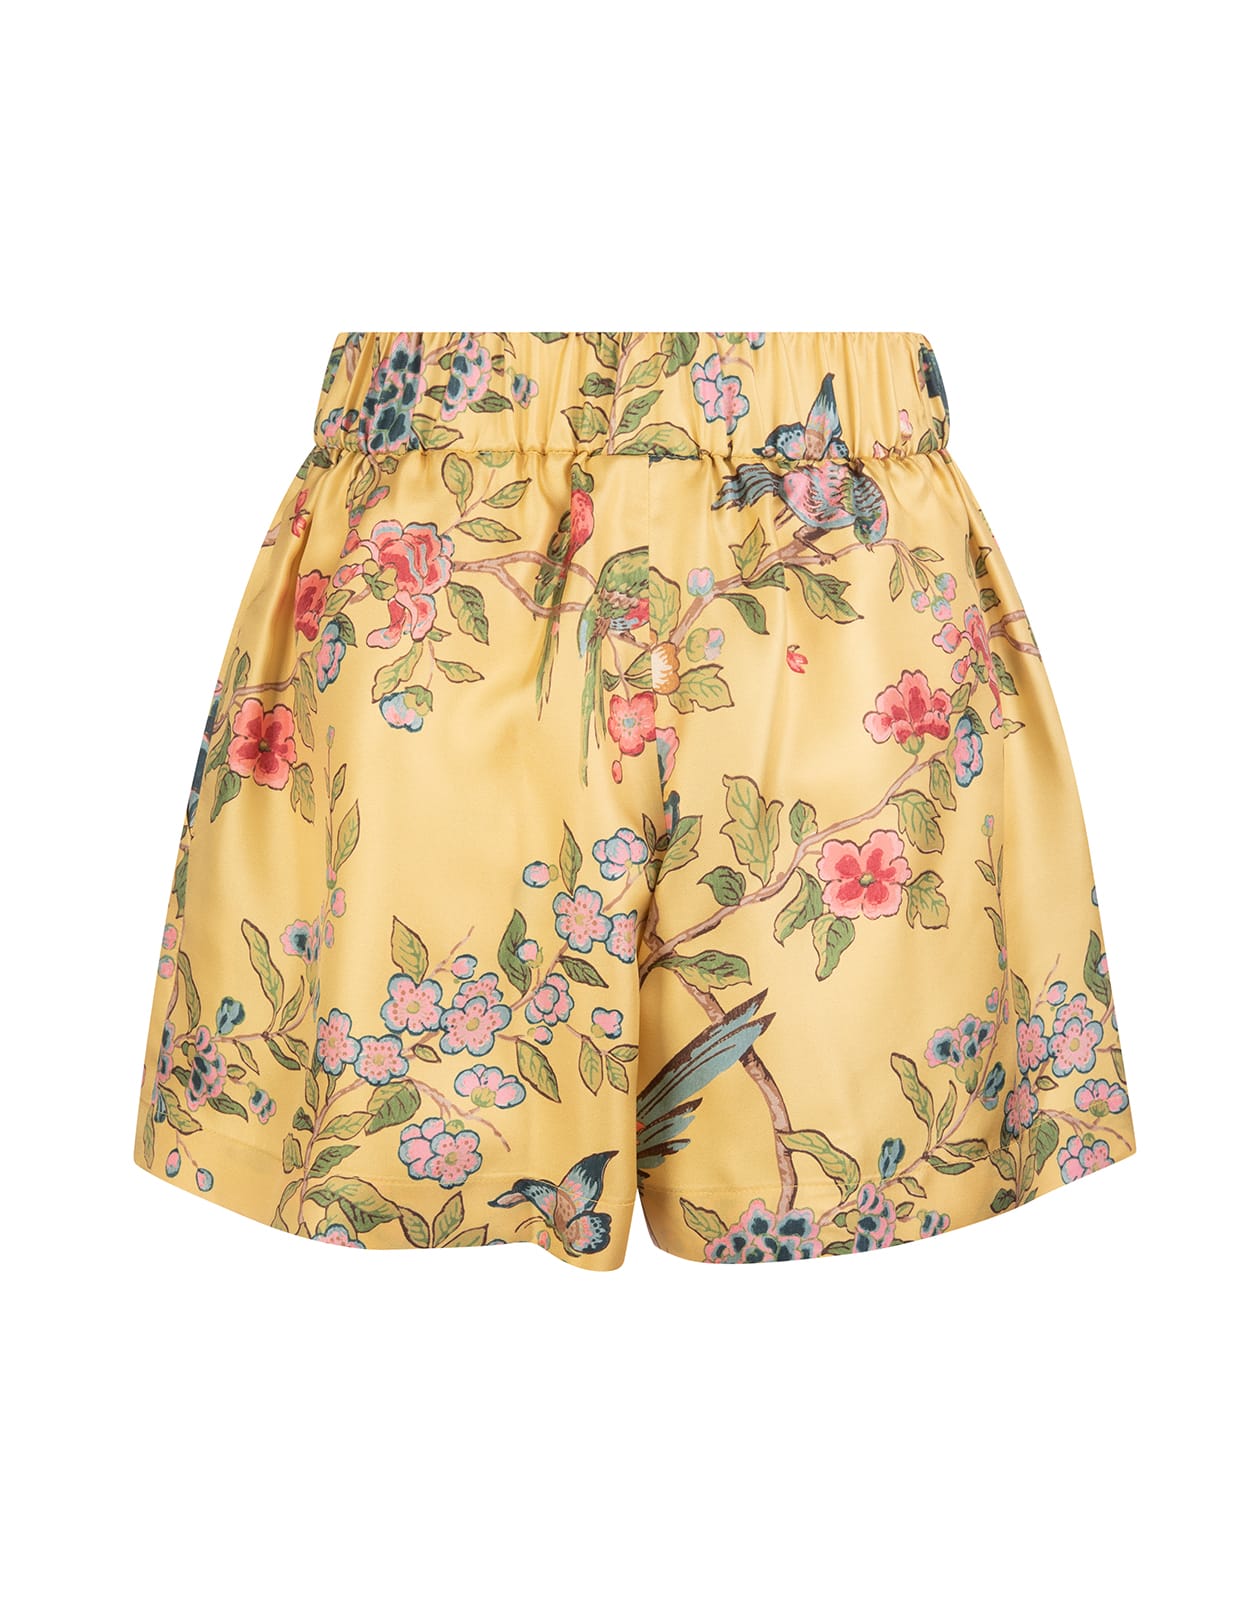 RED VALENTINO WOMAN YELLOW SILK SHORTS WITH EDEN TREE PRINT